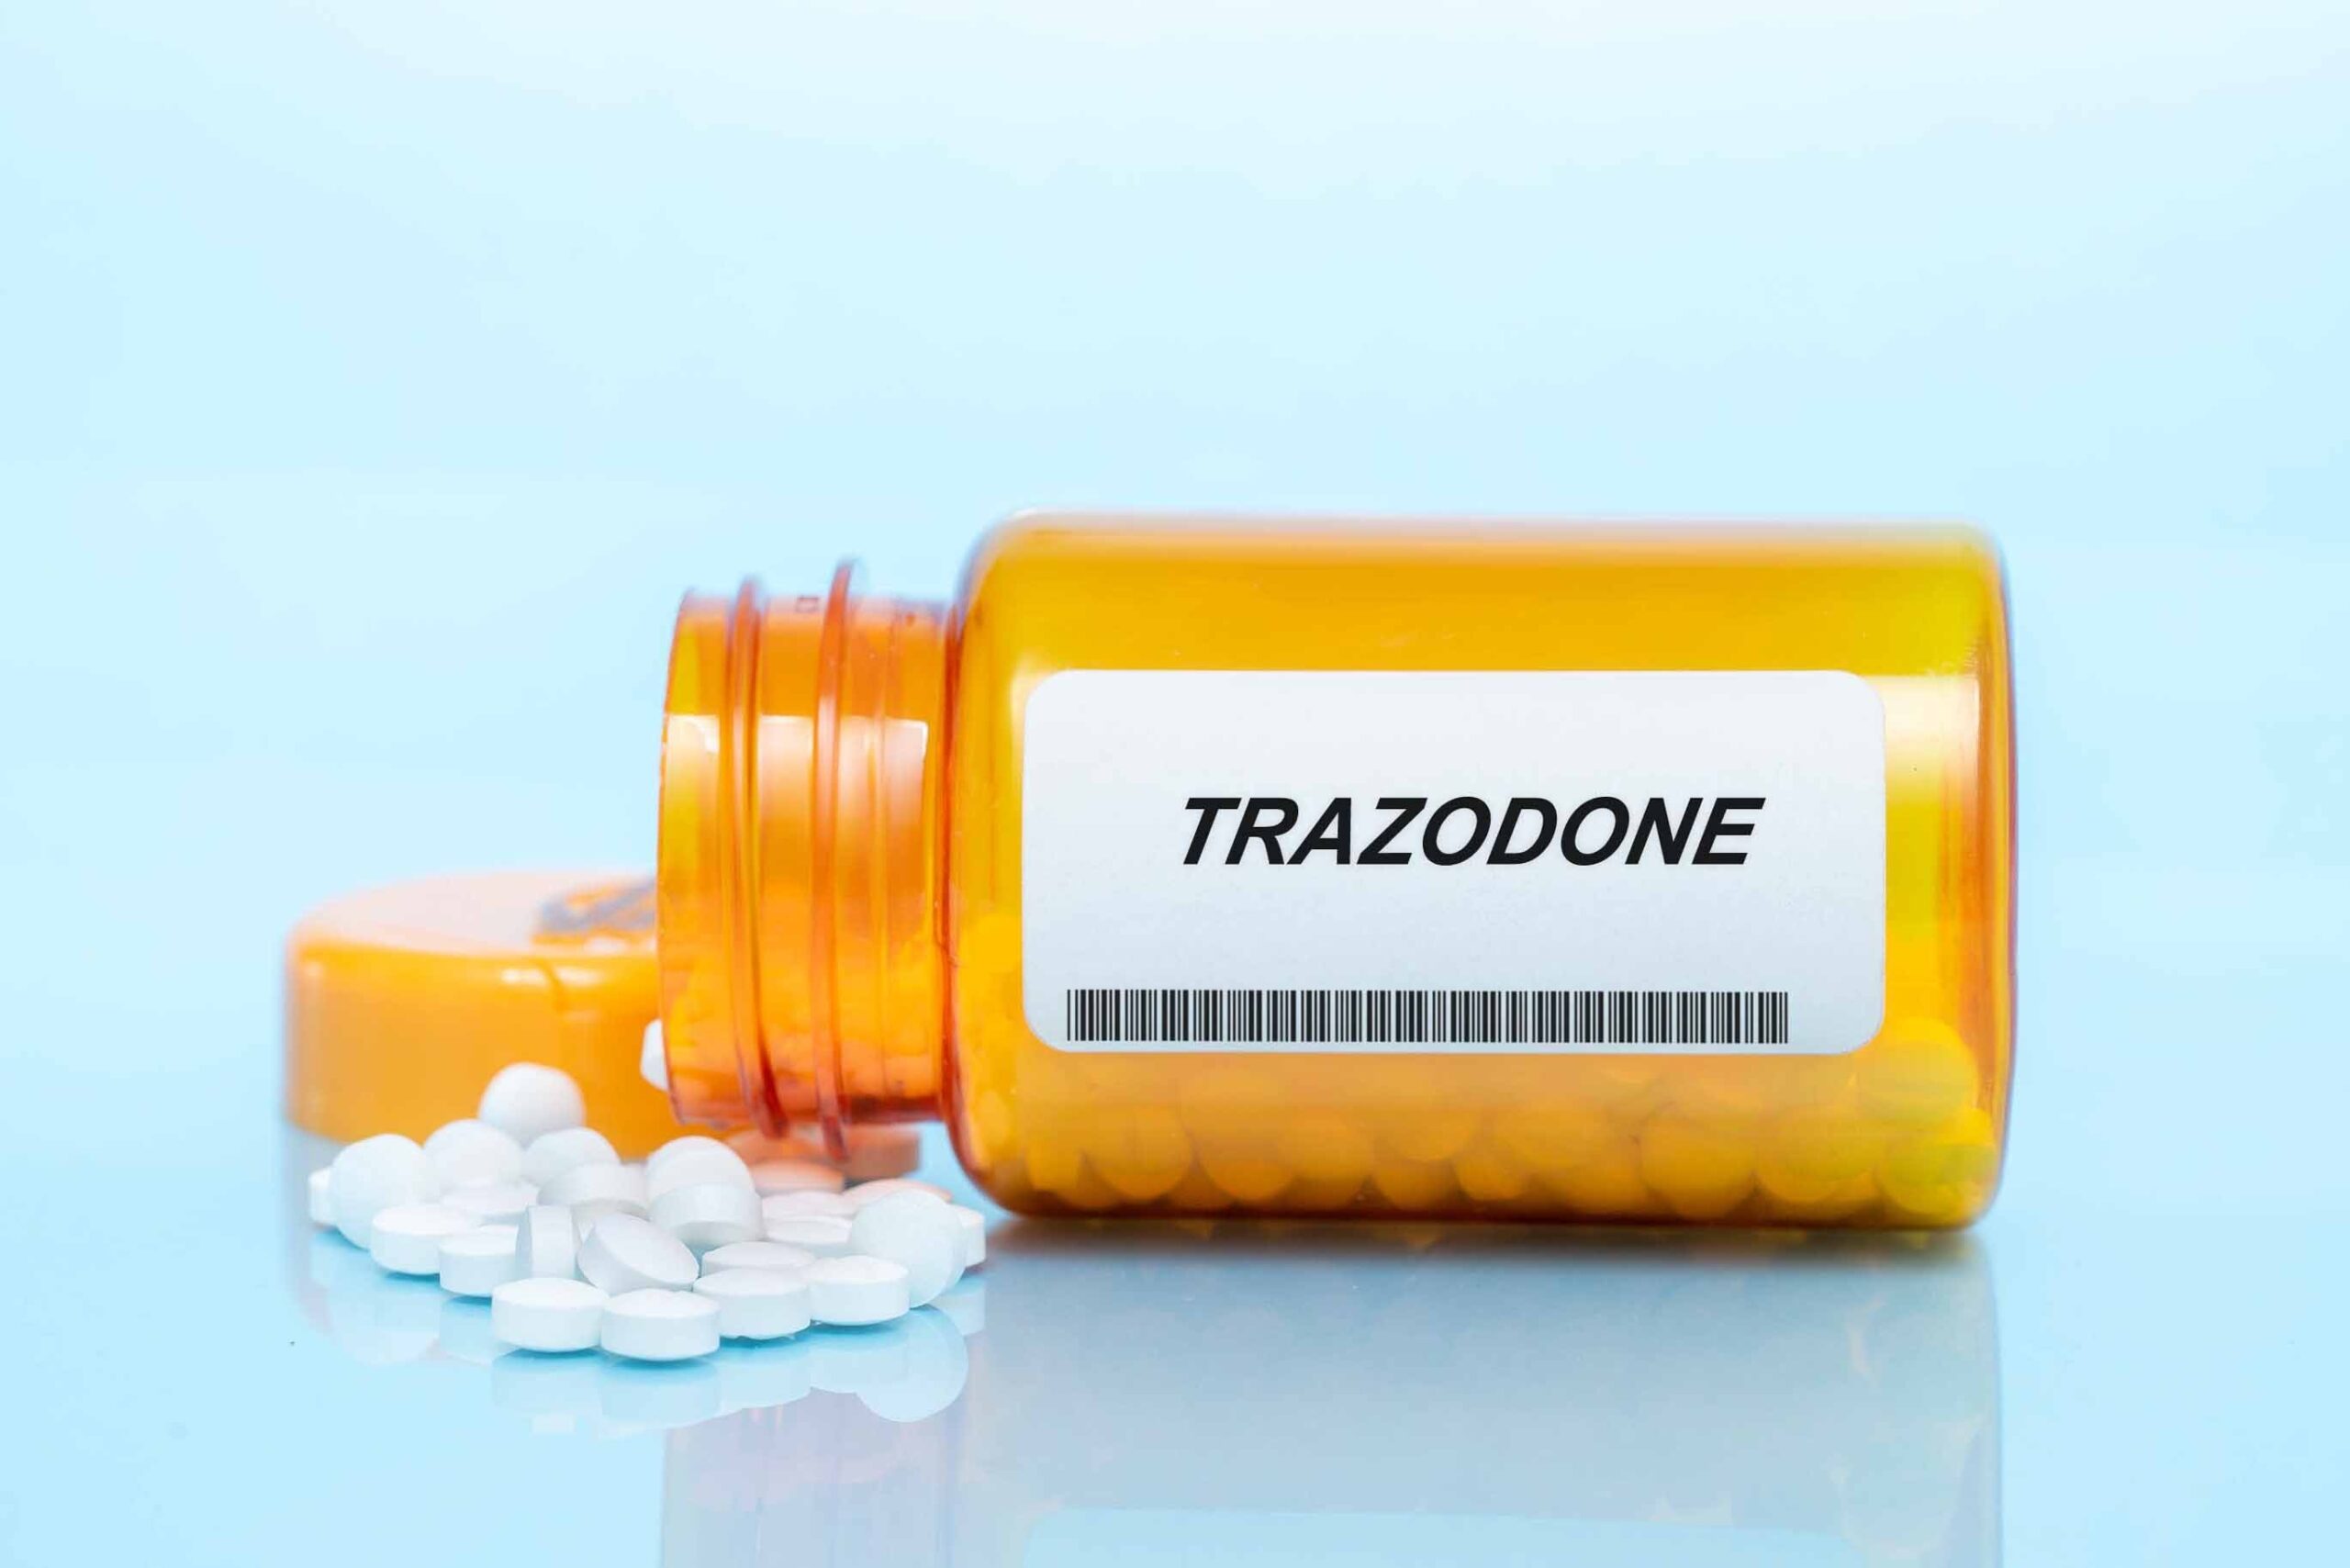 Can you Overdose on Trazodone?